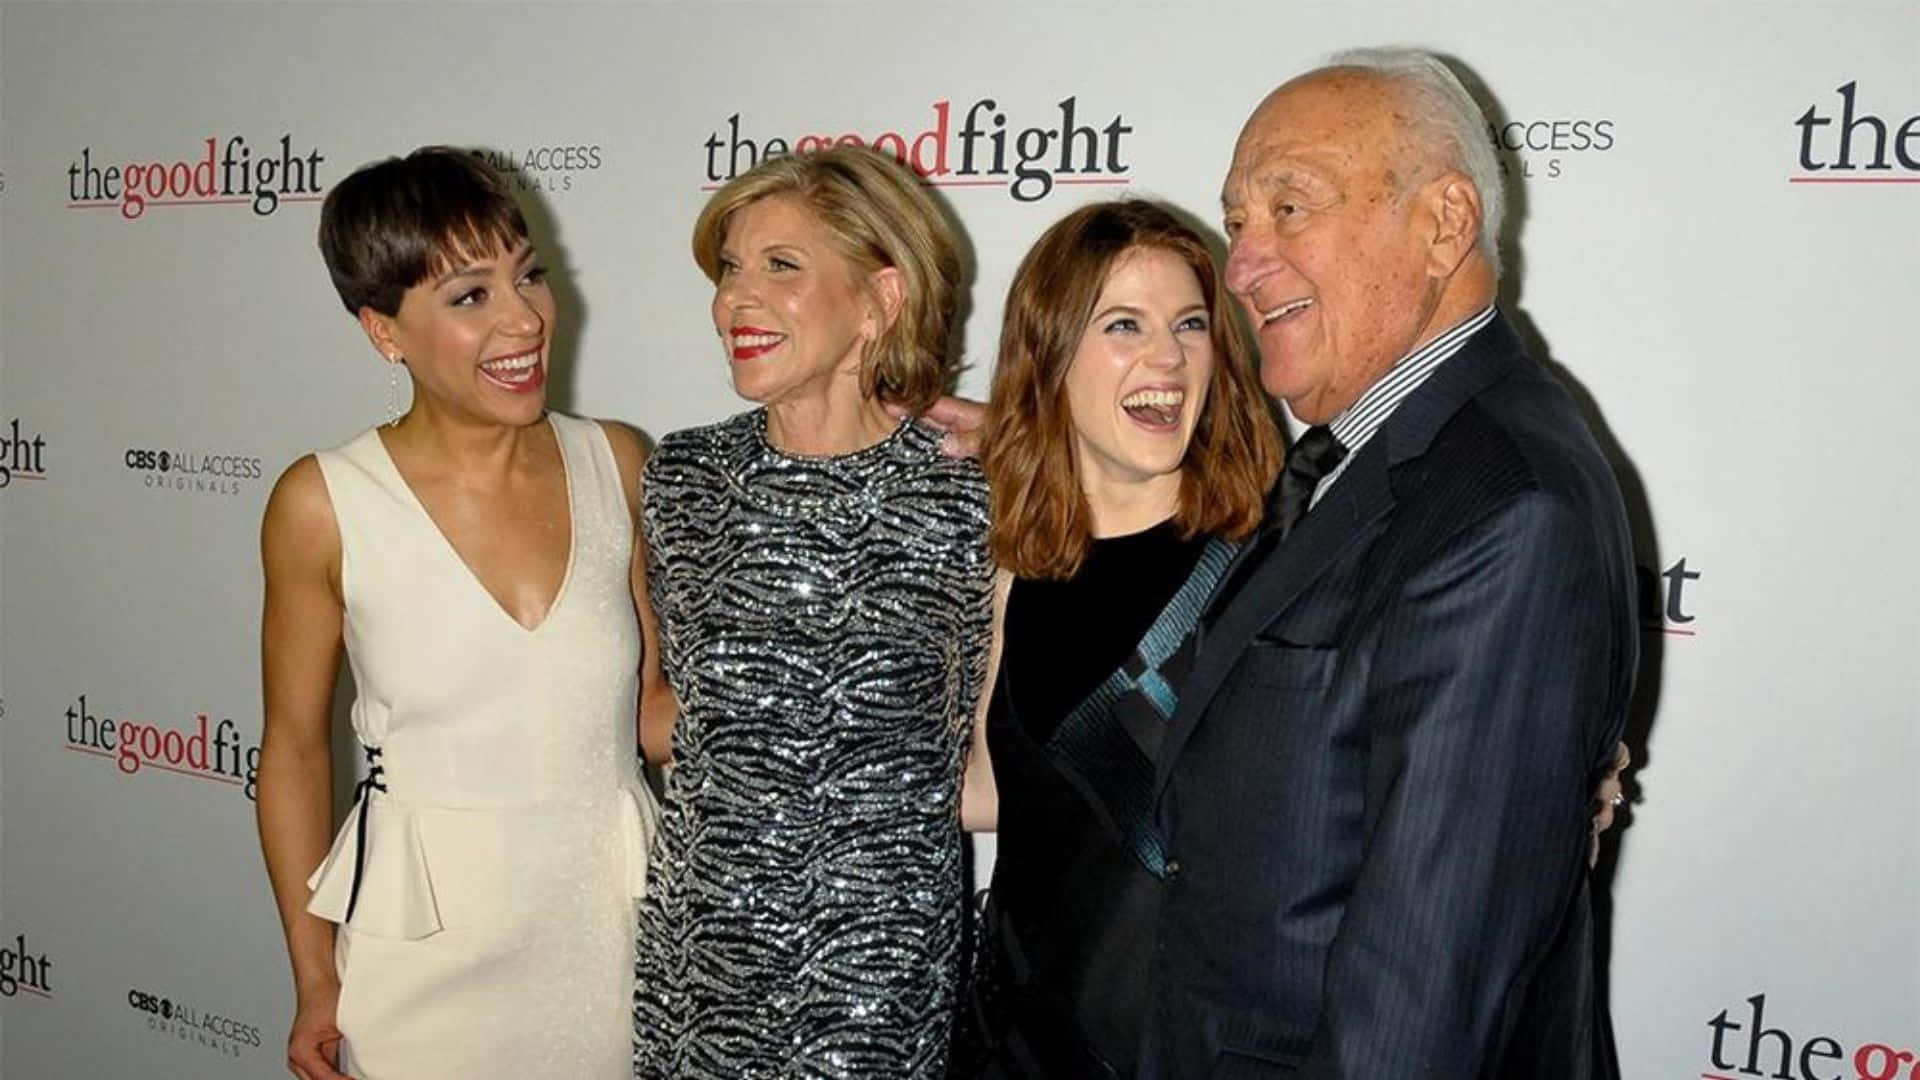 The Good Fight Cast Event Wallpaper